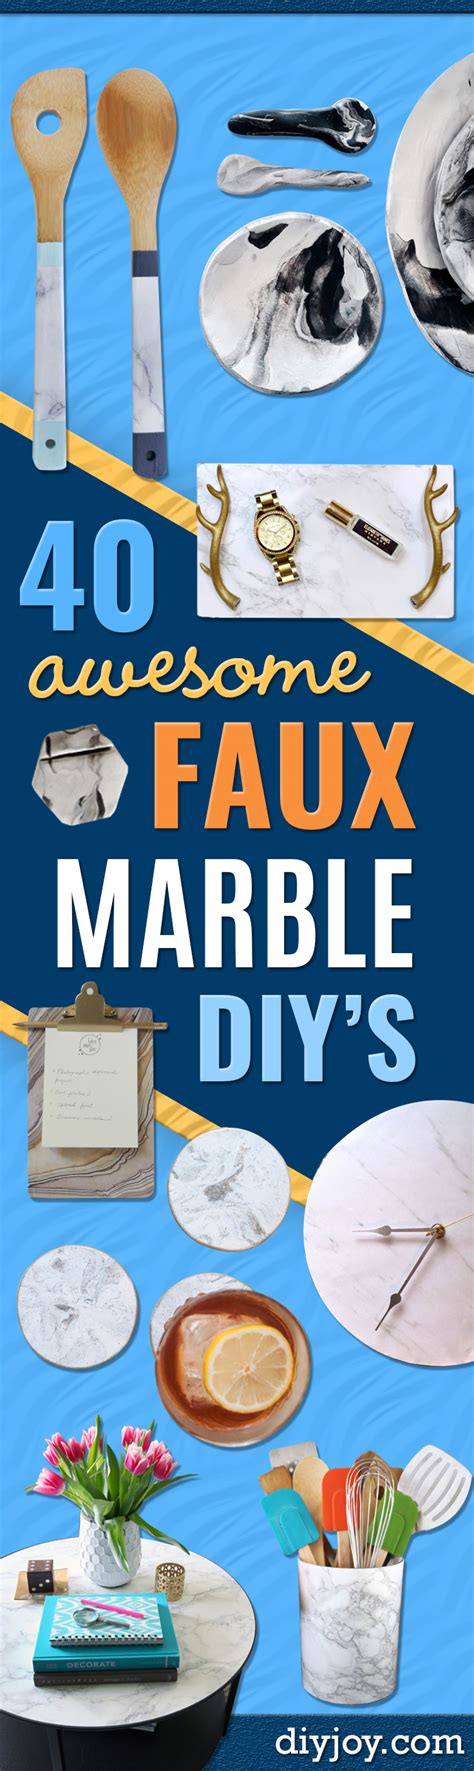 40 Awesome Faux Marble Diys Page 5 Of 9 Diy Joy